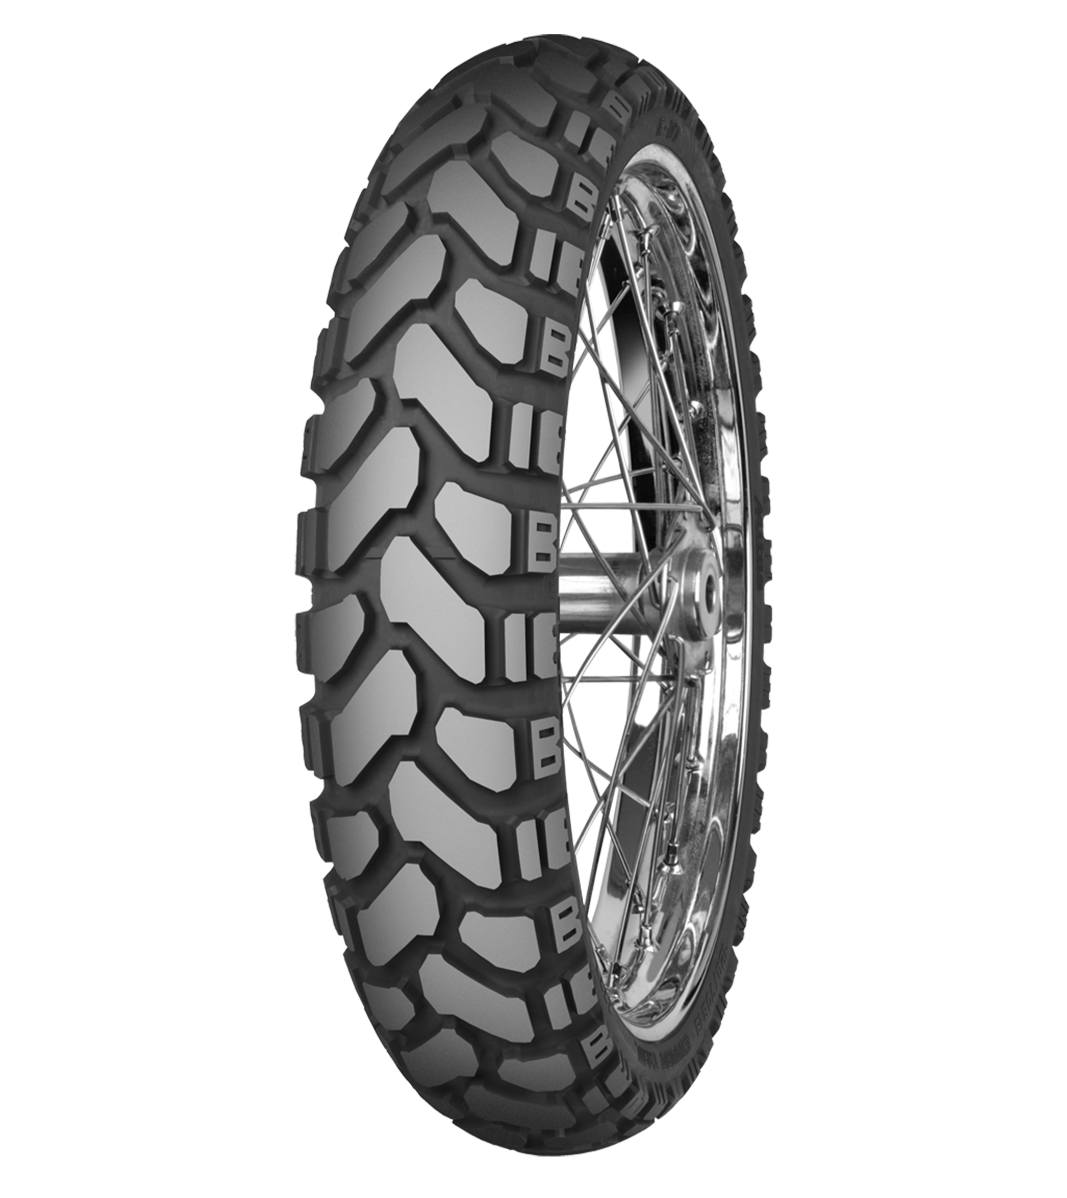 Mitas E-07+ ENDURO TRAIL 120/70B19 Trail ON Trail 60T No Stripe Tubeless Front Tire, 224143, 120/70B19, Adventure Touring, E Series, E-07+ Enduro Trail, Front, Trail, Trail ON, Tires - Imported and distributed in North & South America by Lindeco Genuine Powersports - Premier Powersports Equipment and Accessories for Motorcycle Enthusiasts, Professional Riders and Dealers.